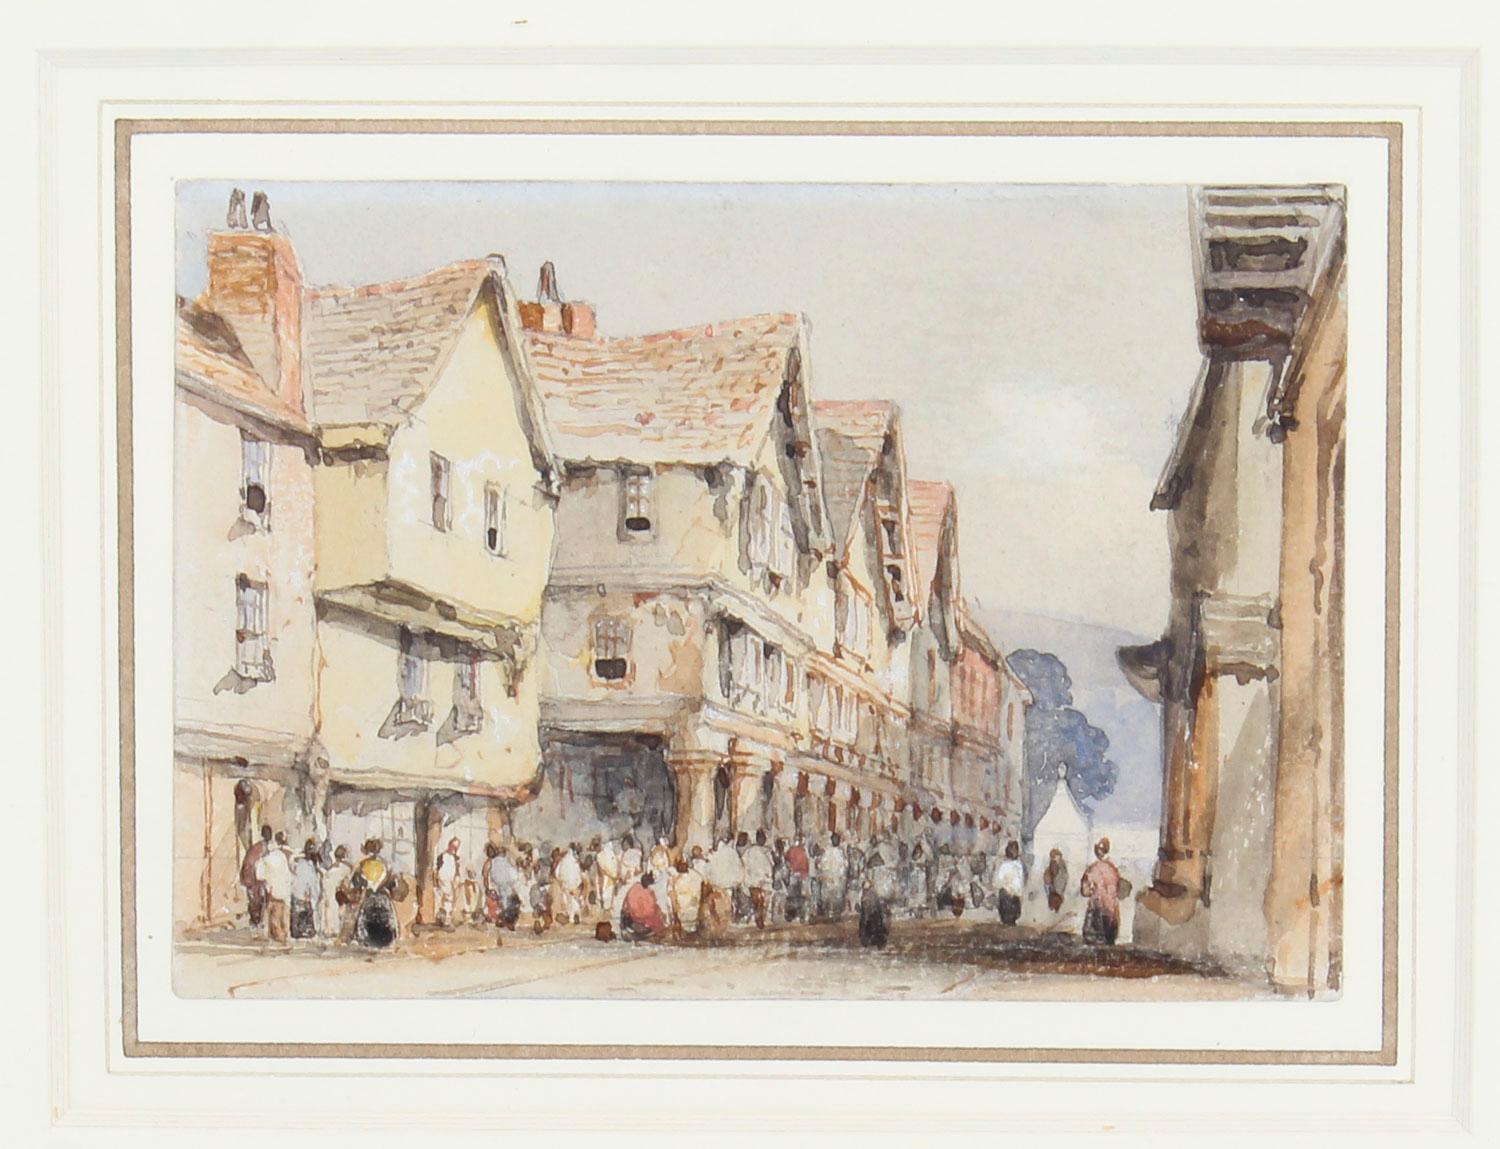 Antique English watercolor York street scene by George Pyne (1800-1884) circa 1840 in date.

This wonderful watercolor features a scene with people going about their business in an old town street, painted with an excellent perspective in muted